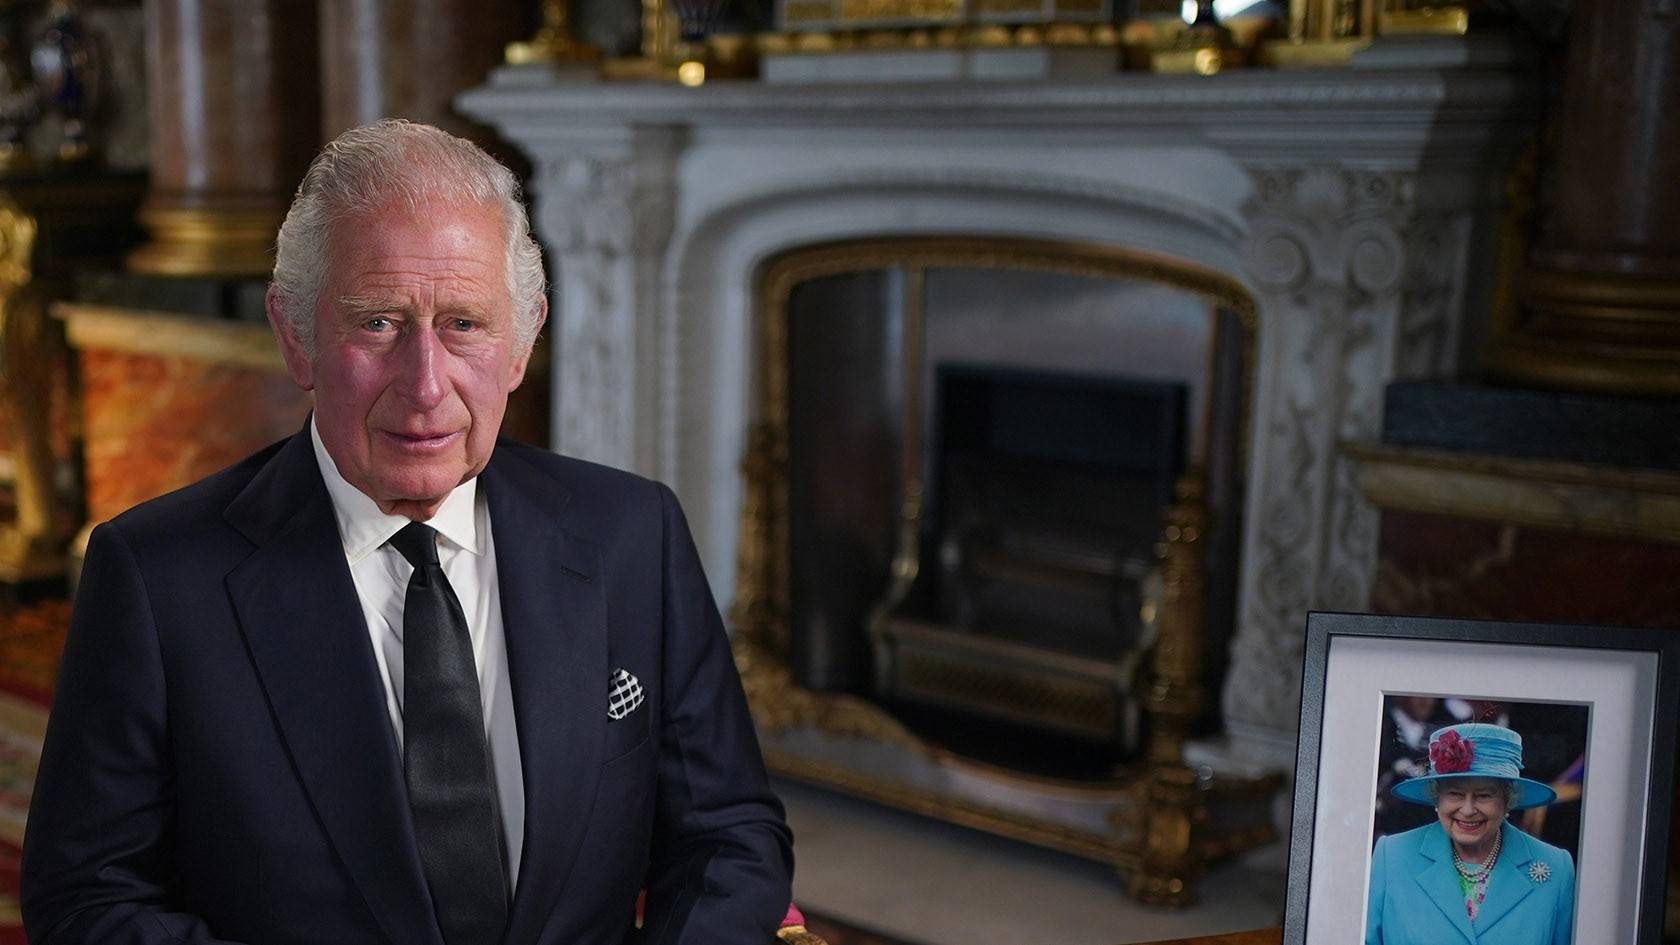 King Charles III pays tribute to his 'darling mama' in first address